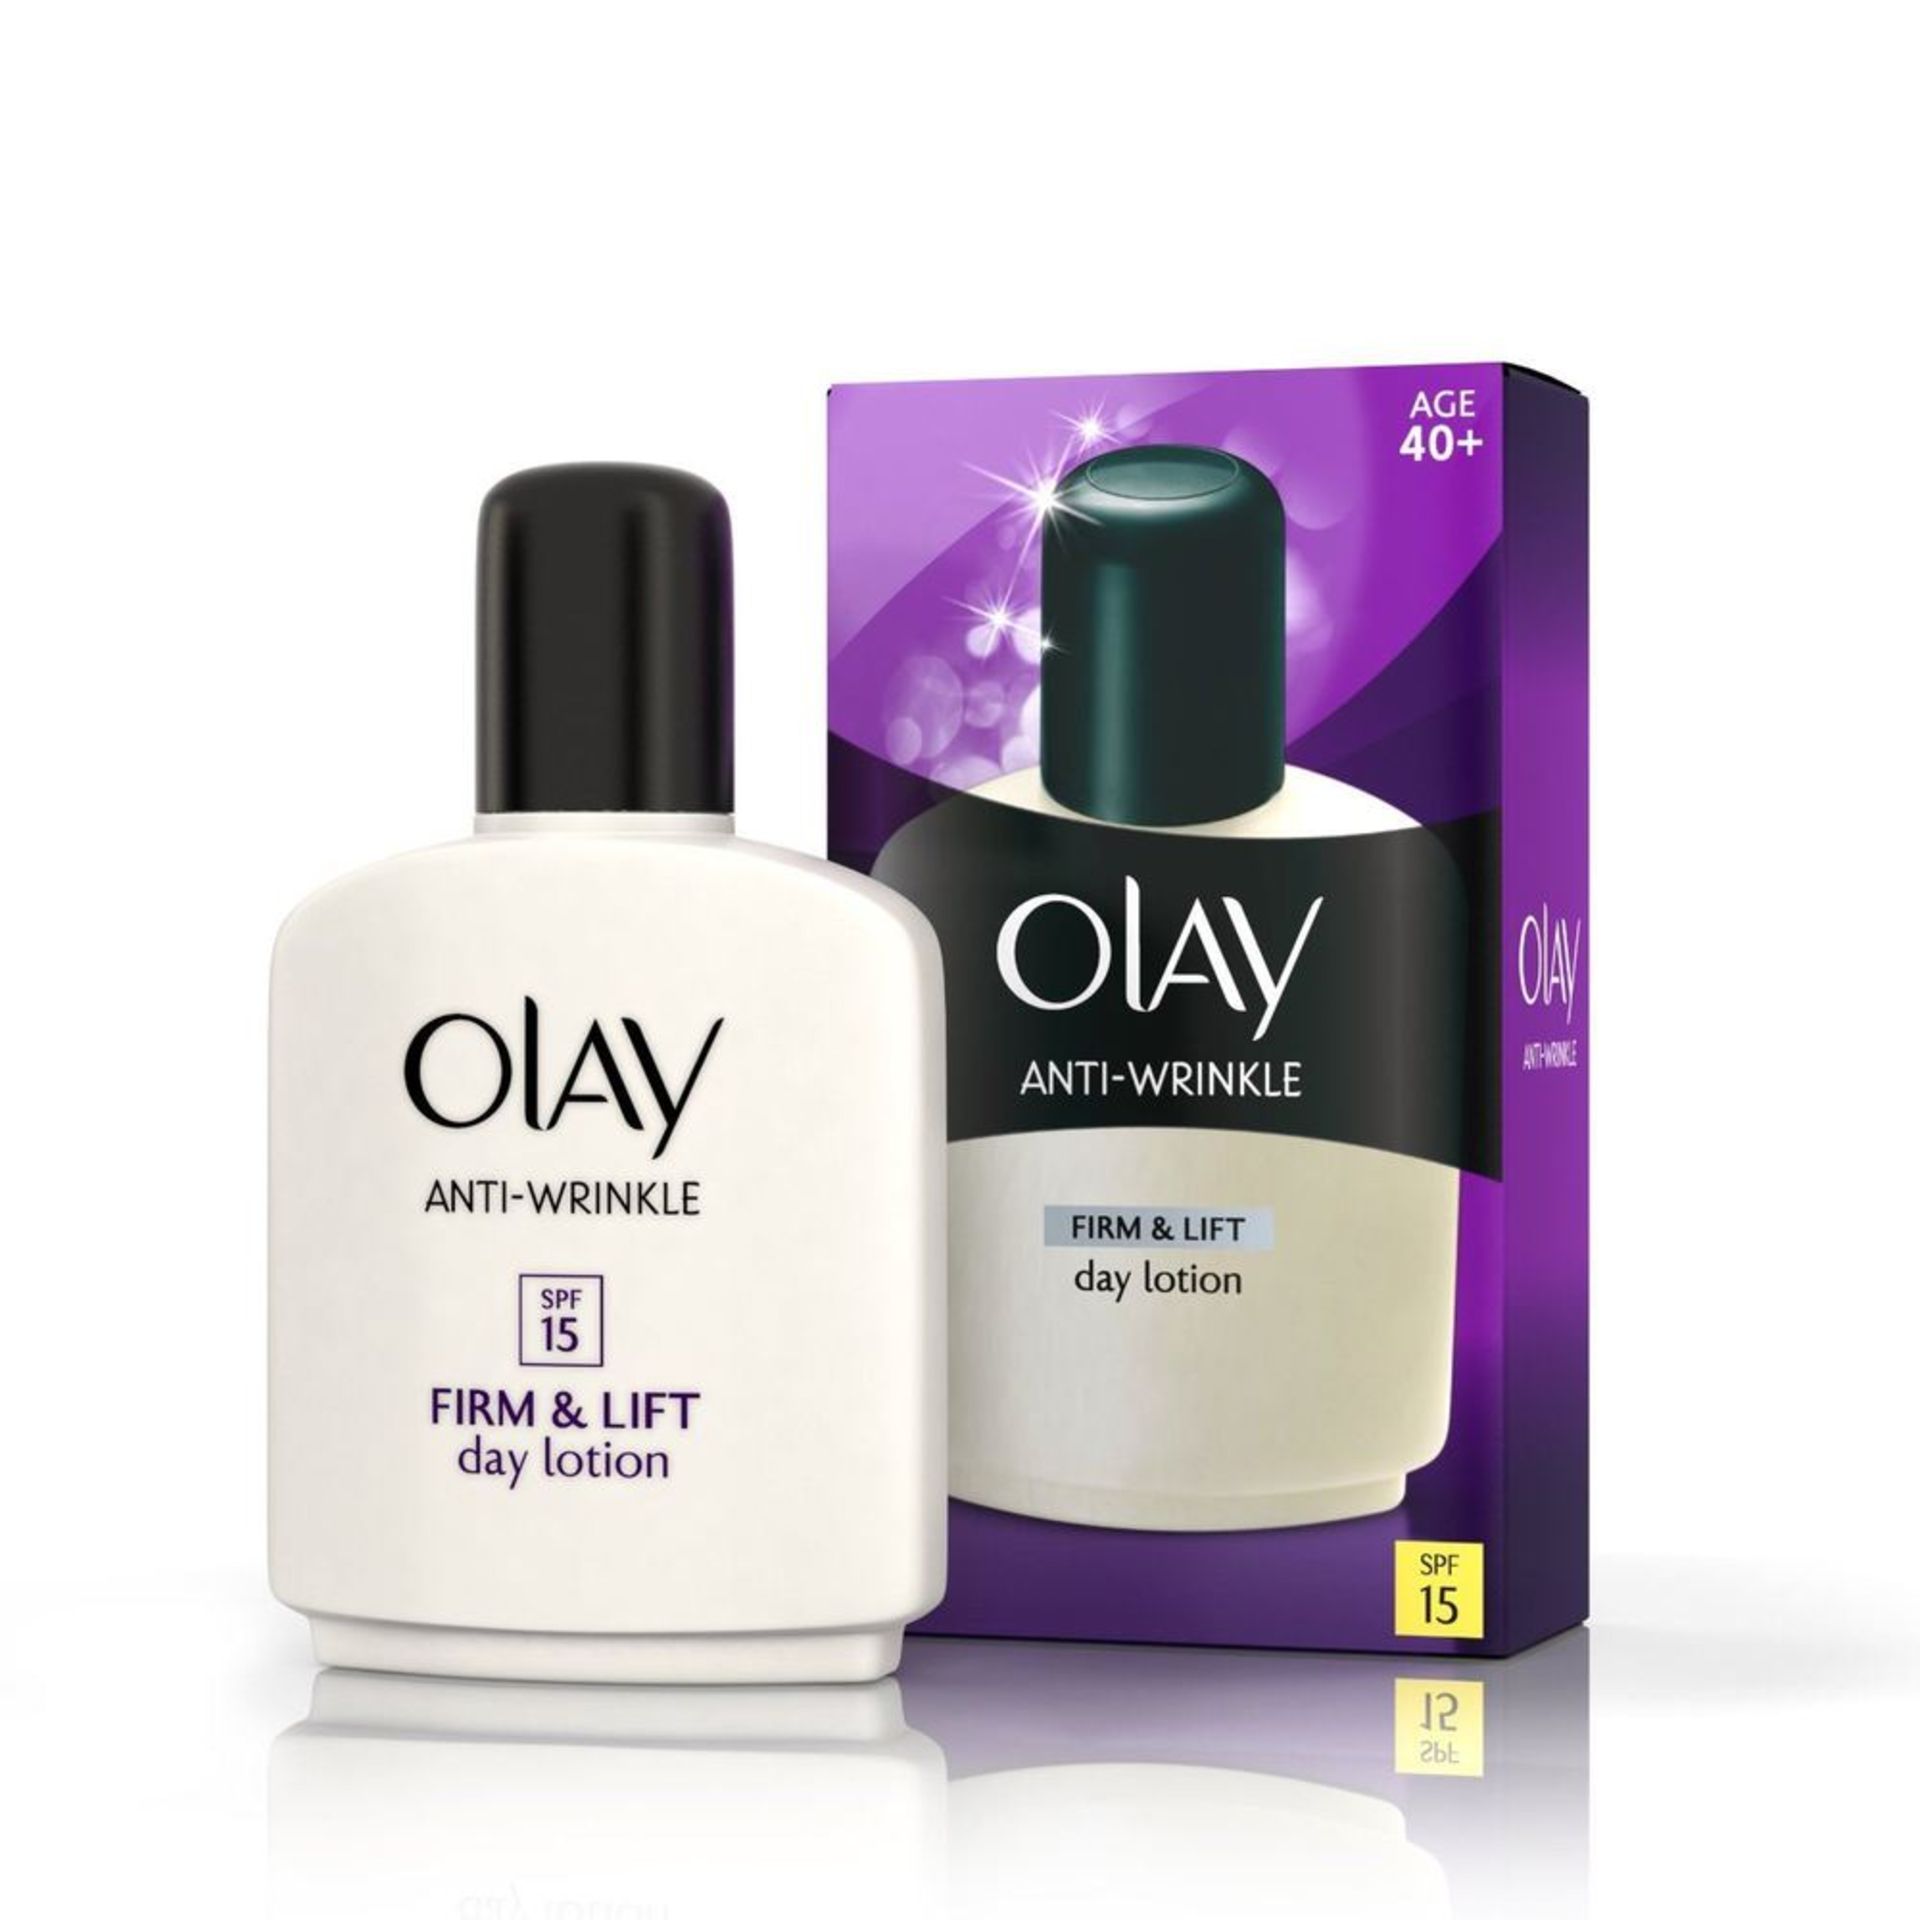 V *TRADE QTY* Brand New Olay Anti-Wrinkle Firm & Lift Day Lotion 100 ml/SPF15/40+ X 10 YOUR BID